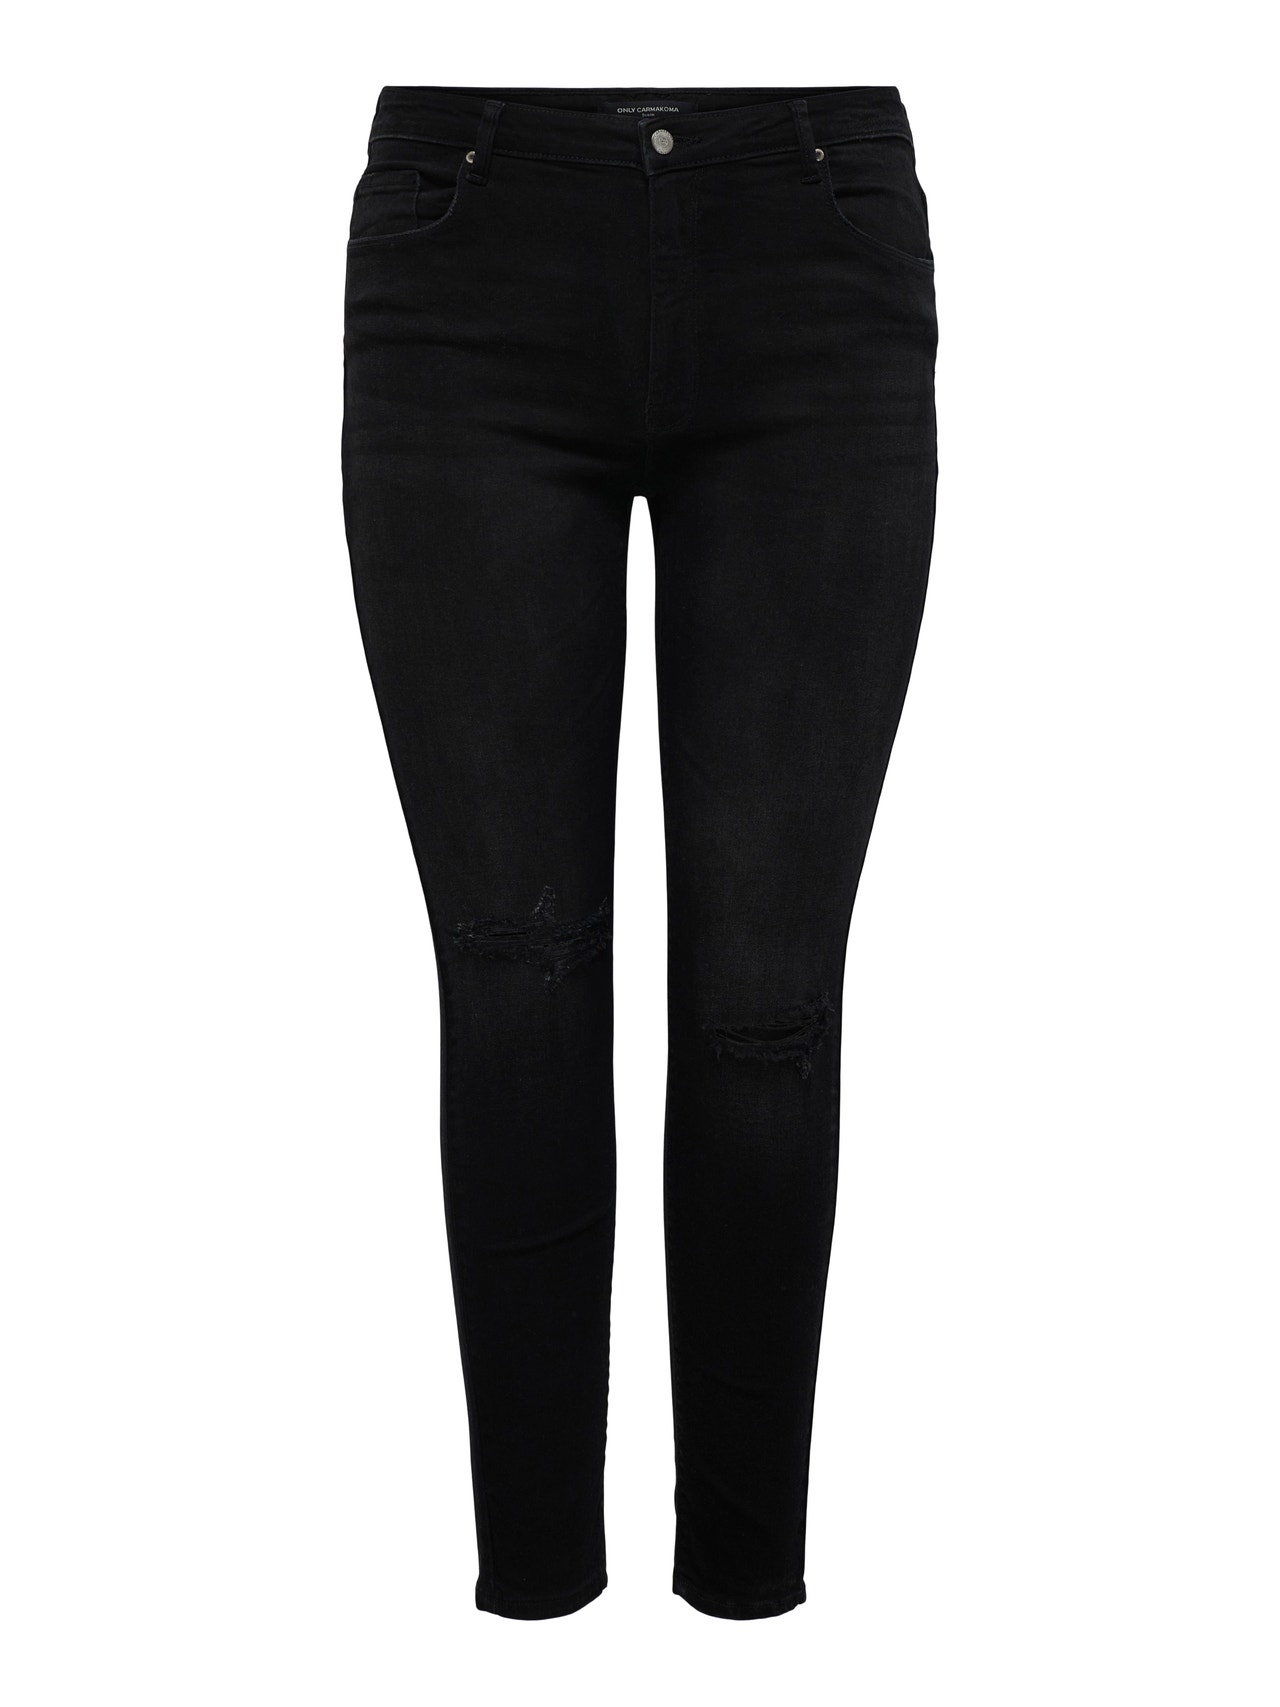 ONLY Skinny Fit Hohe Taille Jeans -Black - 15251164